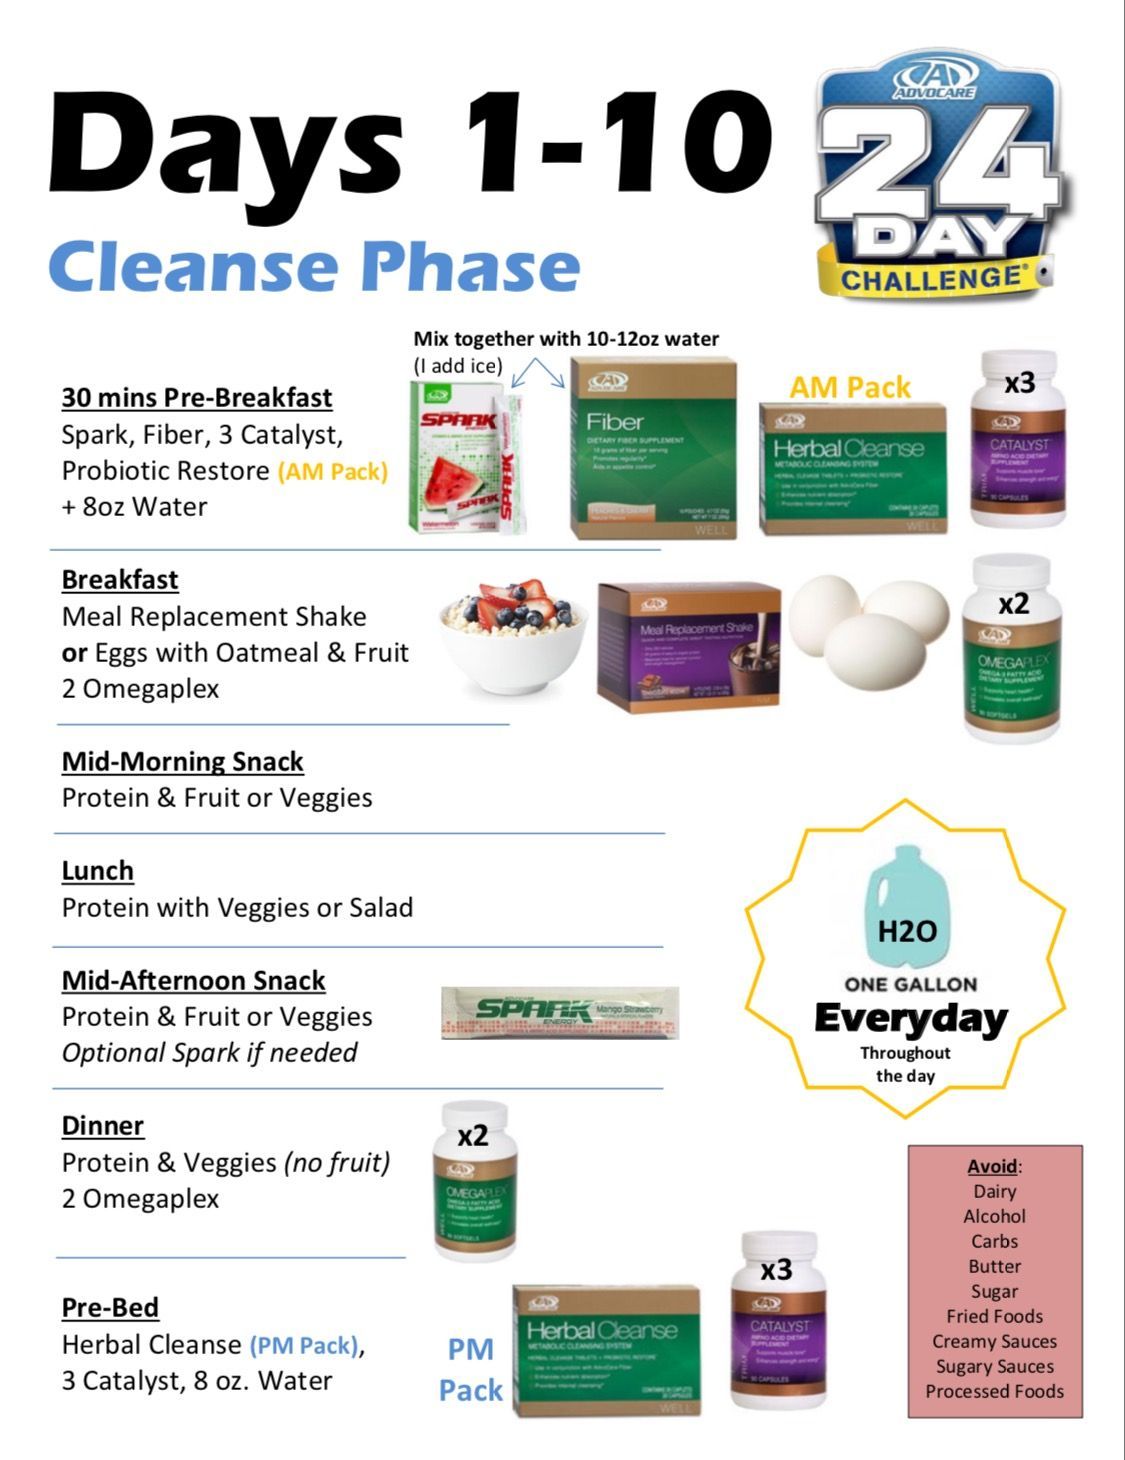 AdvoCare 24 Day Challenge cleanse phase cheat sheet. www.advocare.com/160718301